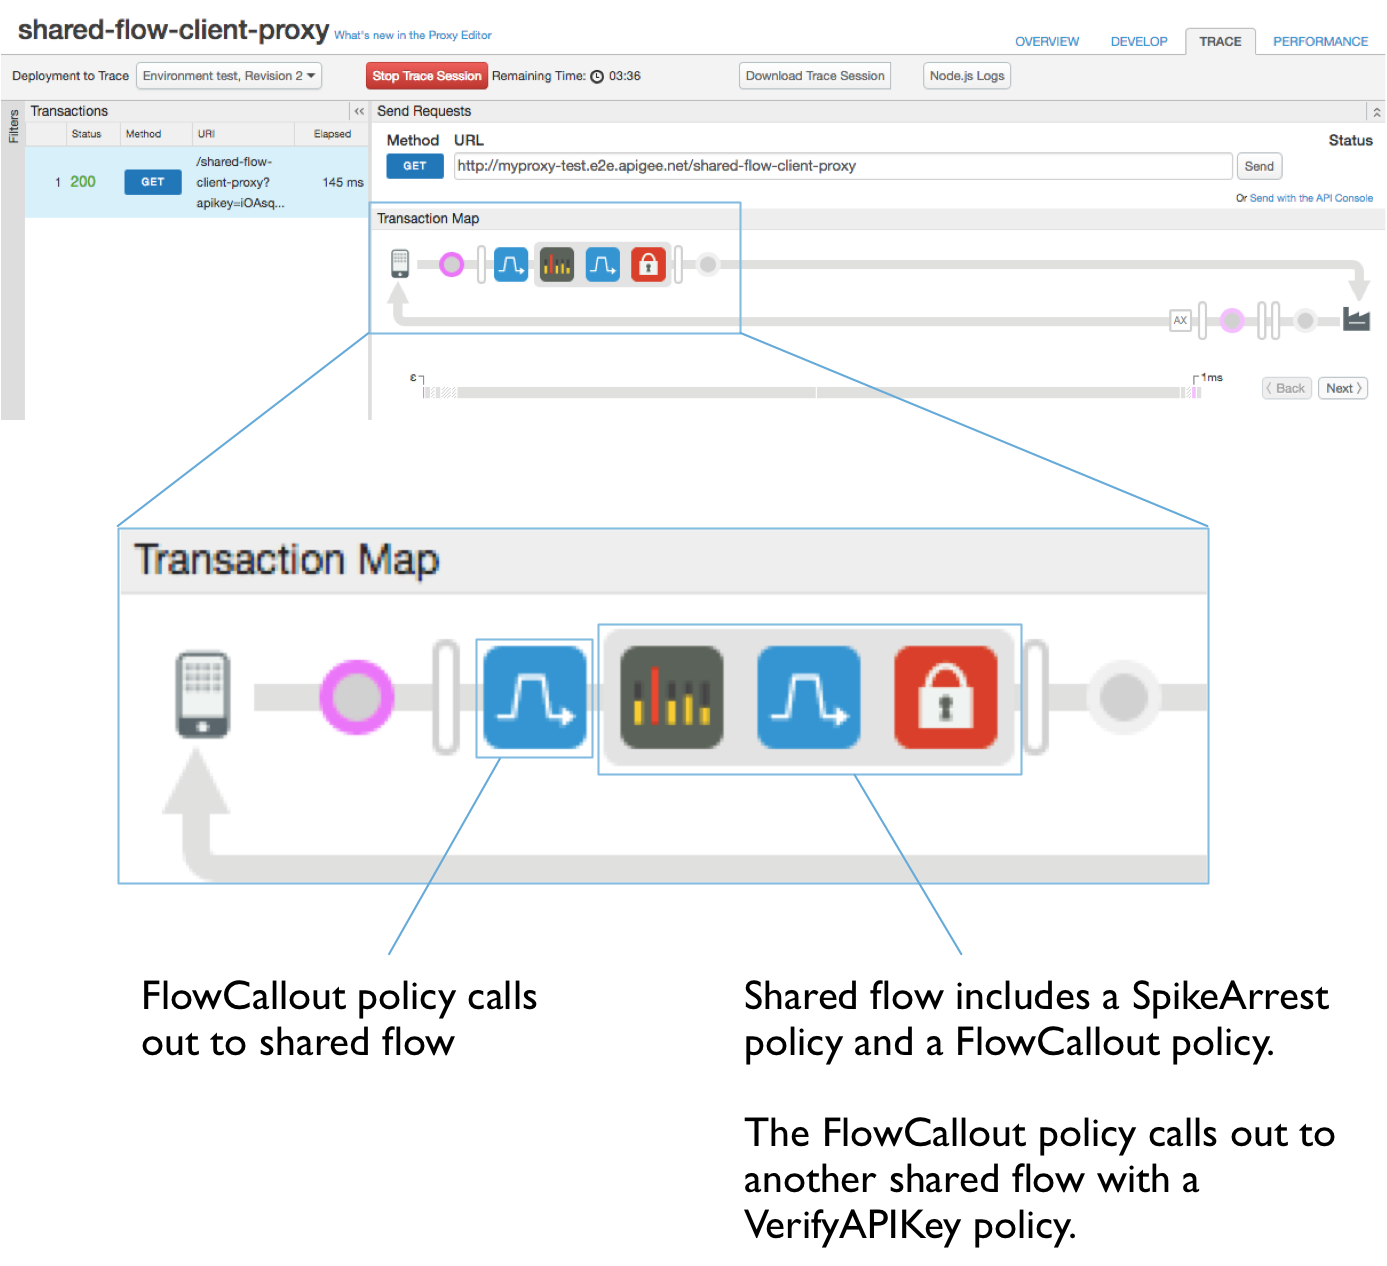 Transaction map.  Callout text:
            a) FlowCallout policy calls out to shared flow.
            b) Shared flow includes a SpikeArrest policy and a FlowCallout policy.
            The FlowCallout policy calls out to another shared flow with a VerifyAPIKey policy.